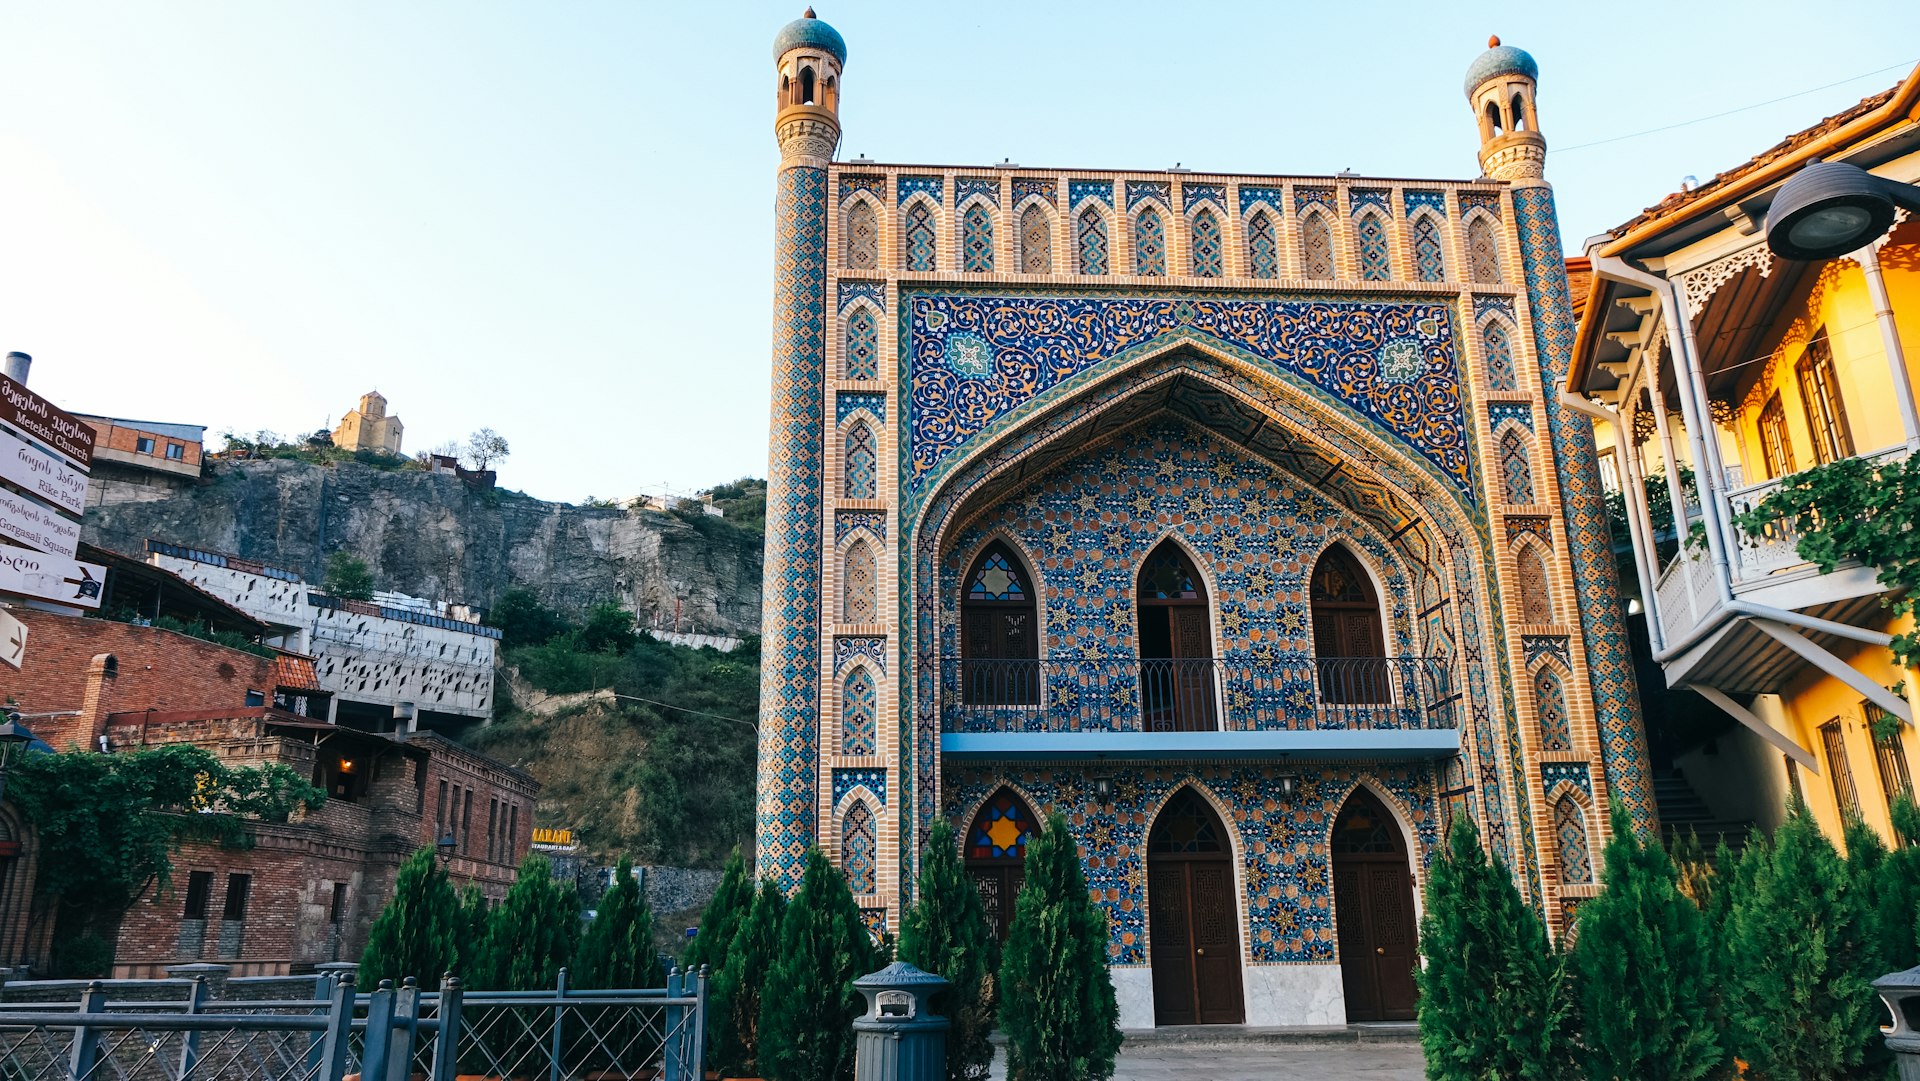 The ornate facade of the Chreli Abano (Orbeliani) sulphur baths in Tbilisi; it's entirely covered in blue and yellow tiles and there are arched doors, as well as minarets on each corner.